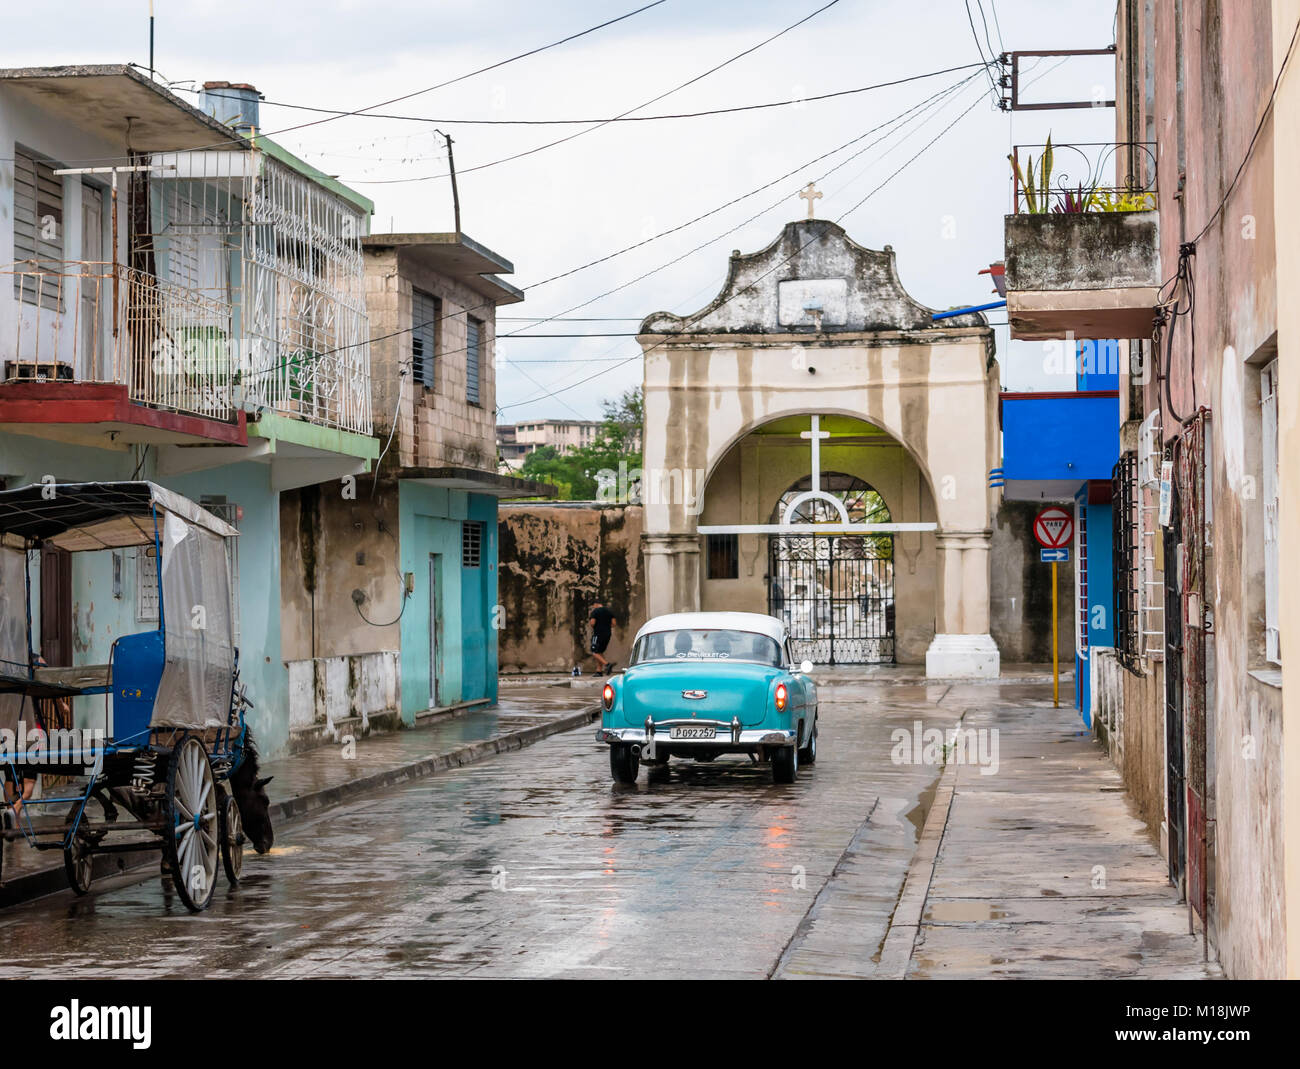 Holguin, Cuba - August 31, 2017: View of an American classic car driving towards the entrance to a cemetery Stock Photo